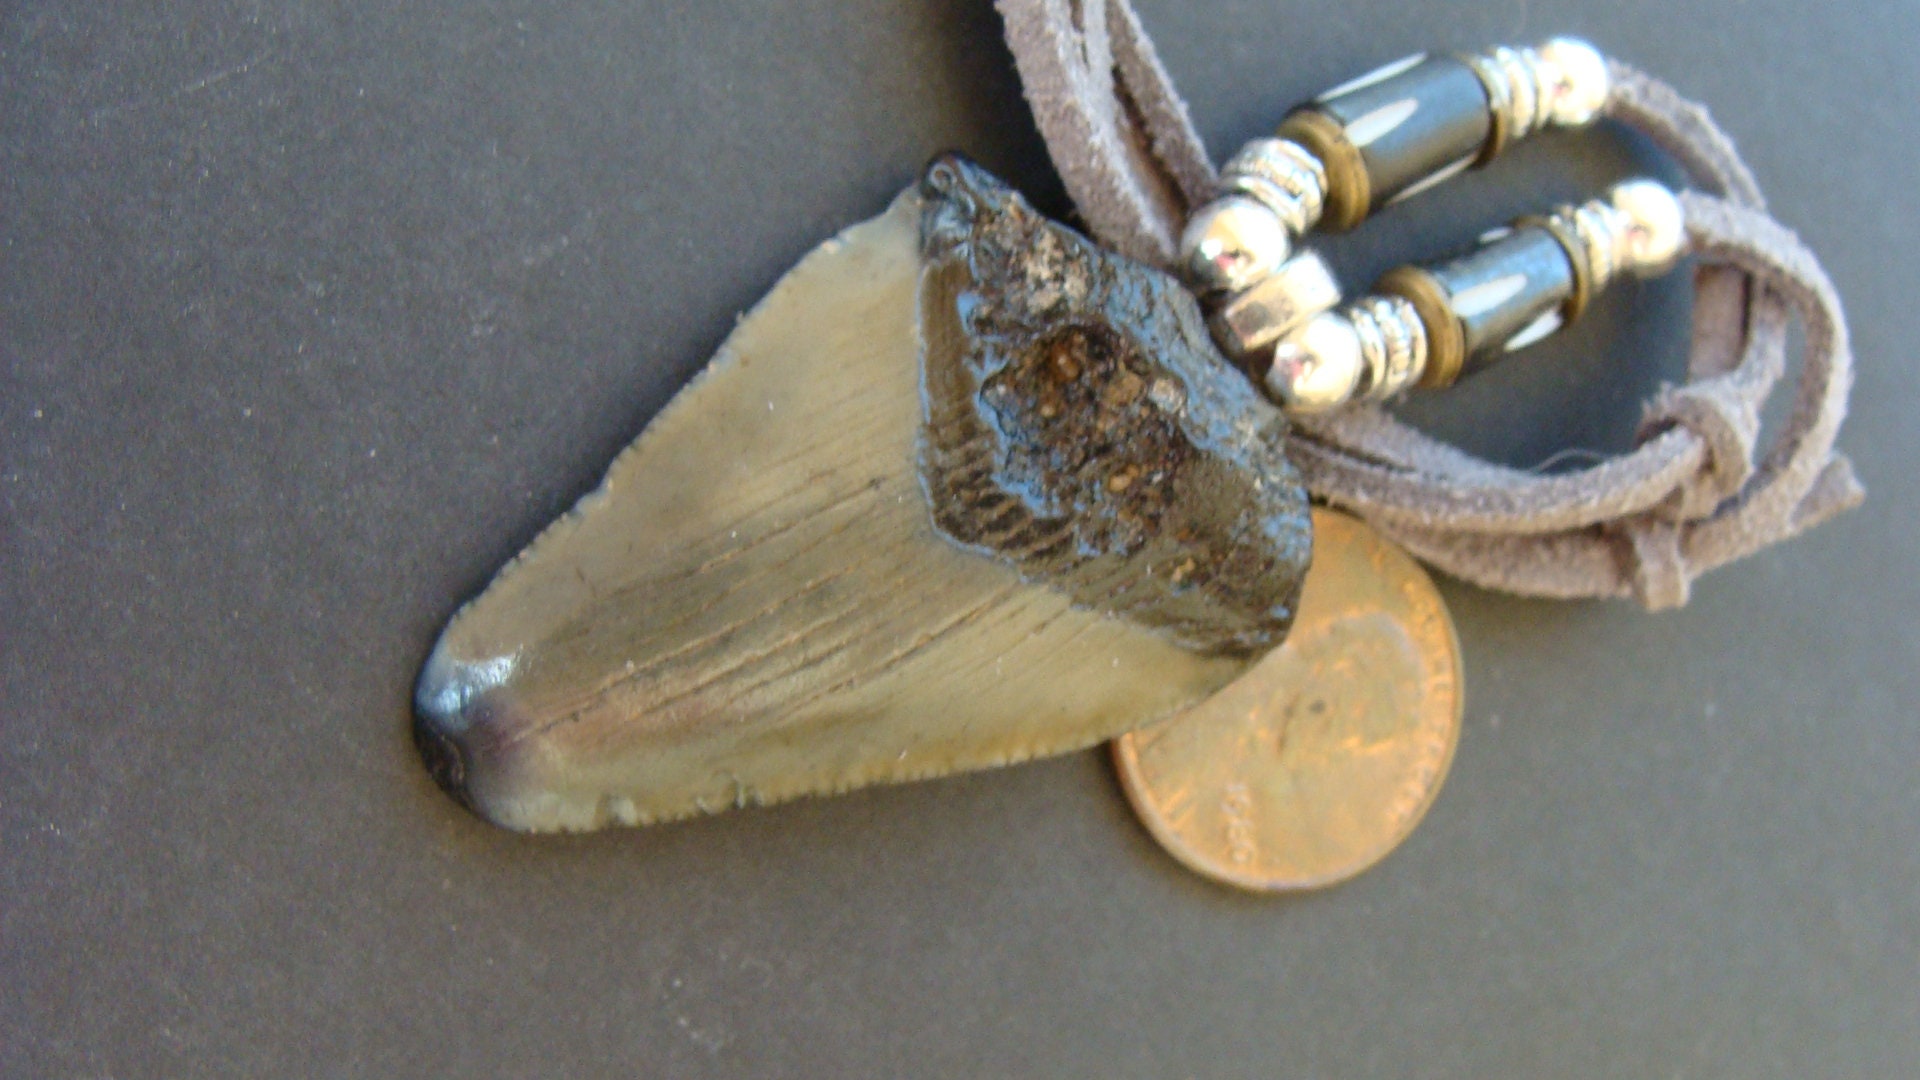 Peruvian shark tooth necklace for sale | Buried Treasure Fossils